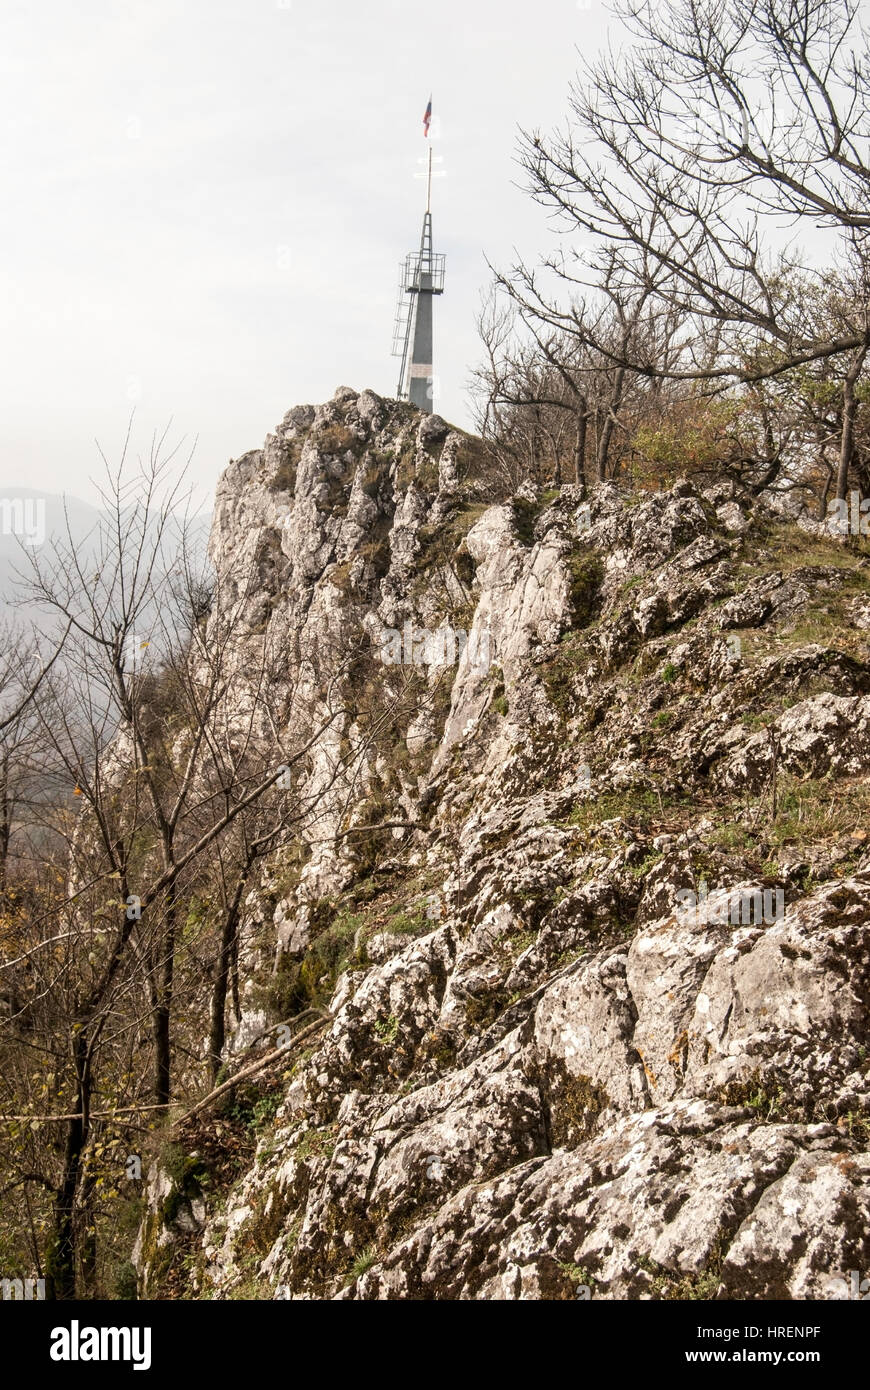 Vapenna hill with limestone rocks and view tower in autumn Male Karpaty mountains in Western Slovakia Stock Photo